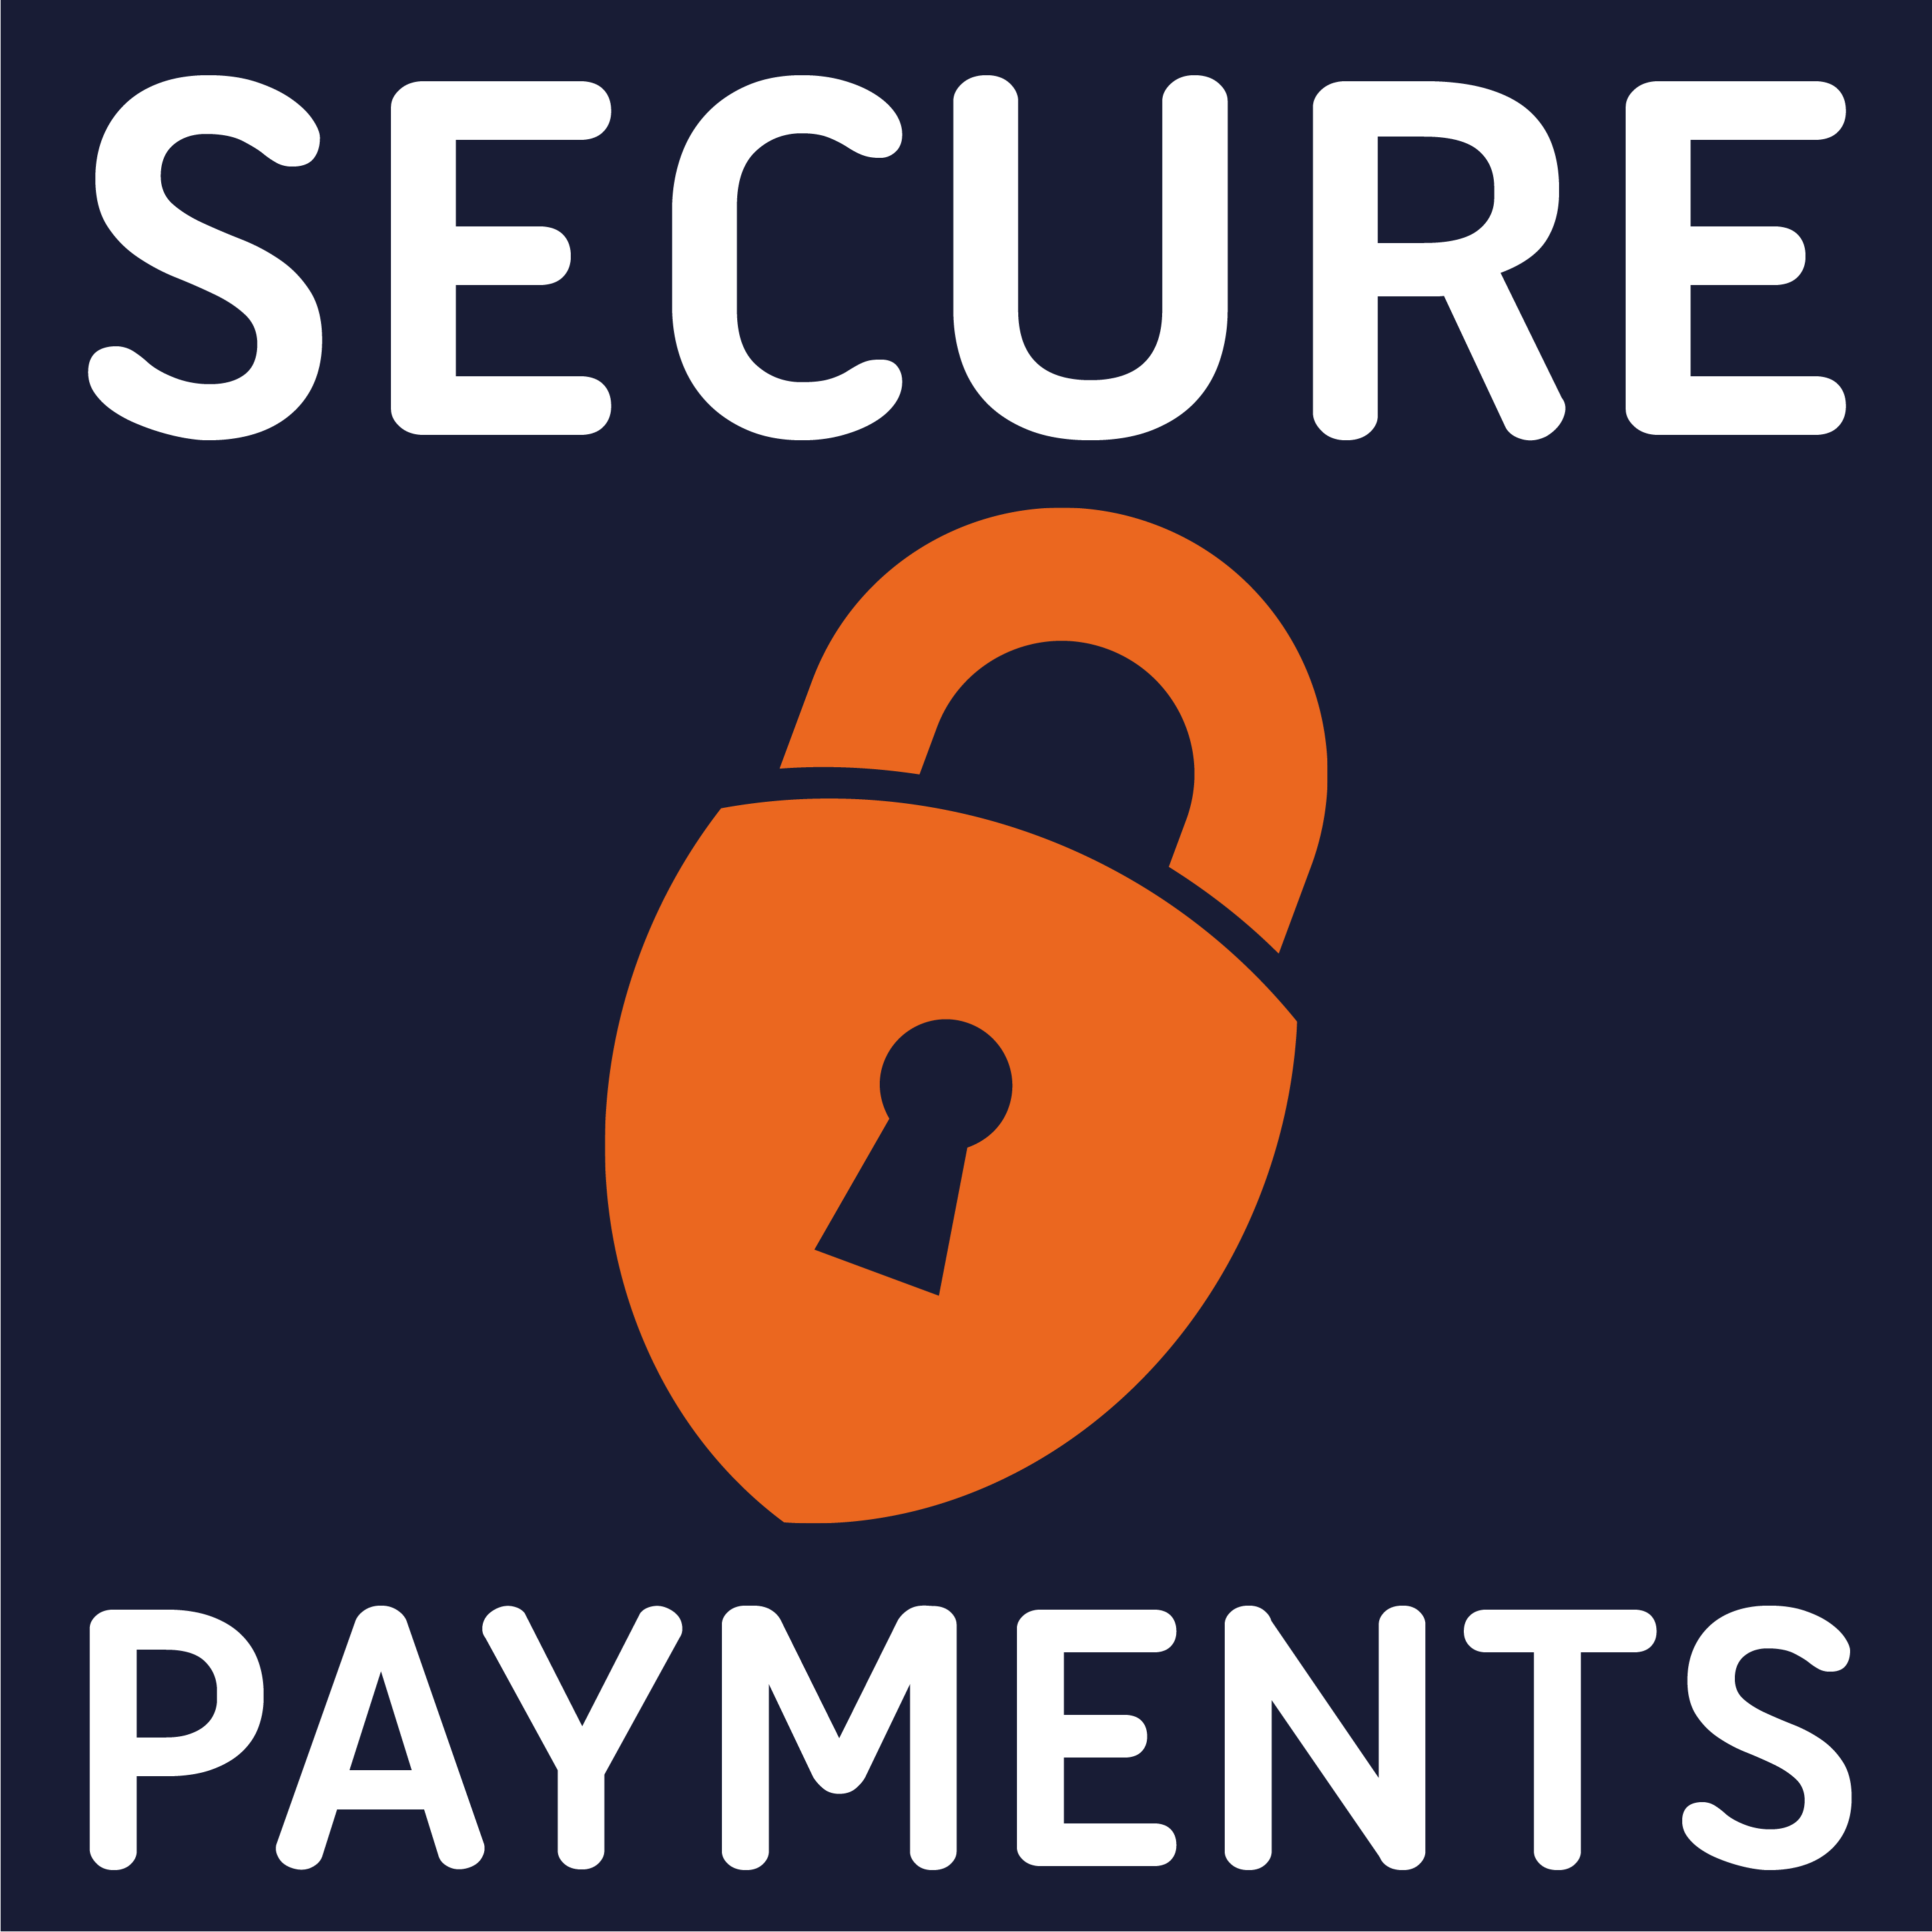 Payments 22: The Future of Security and CX